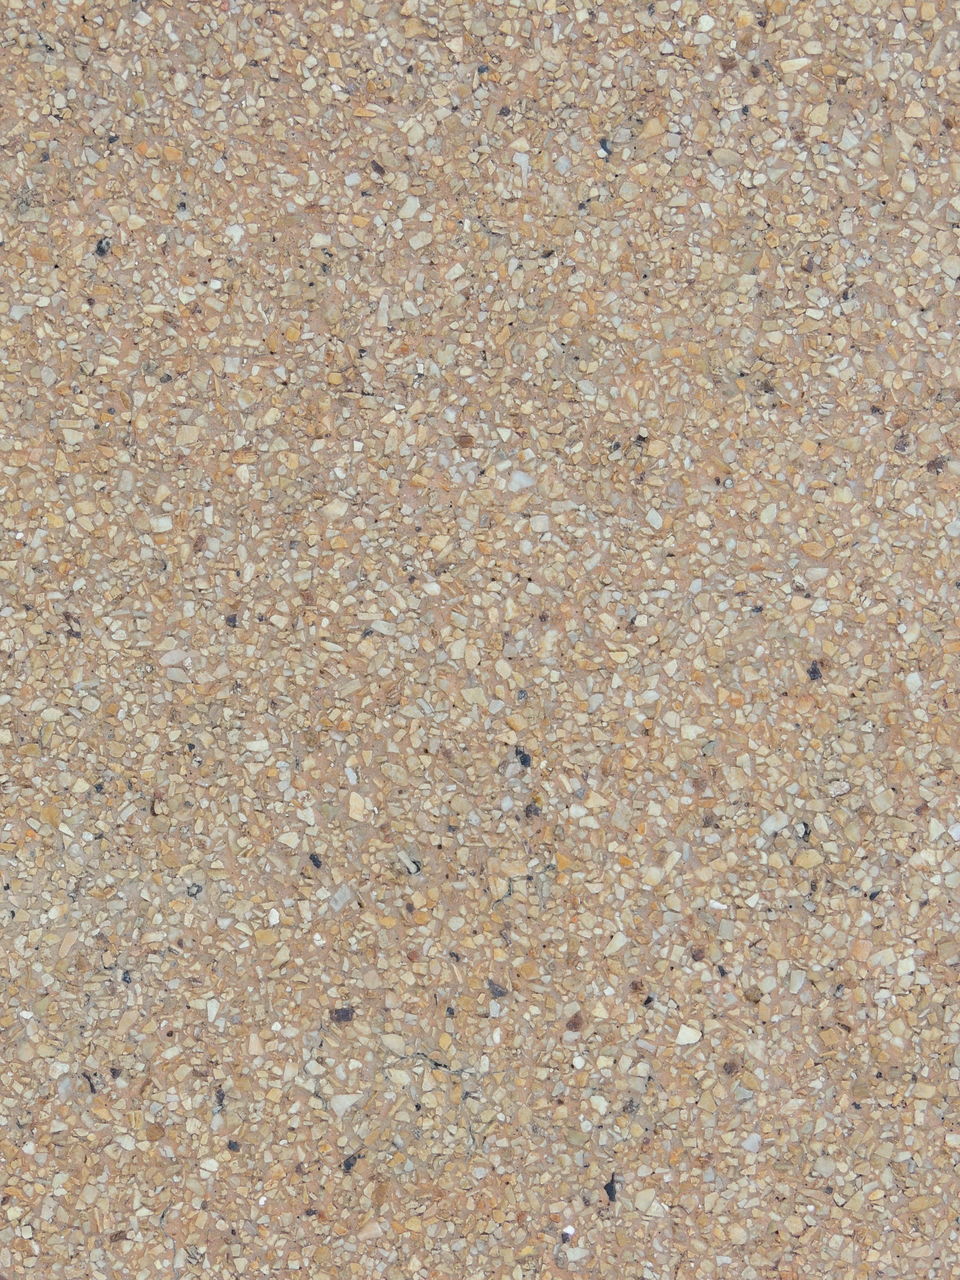 FULL FRAME SHOT OF SAND WITH TEXT